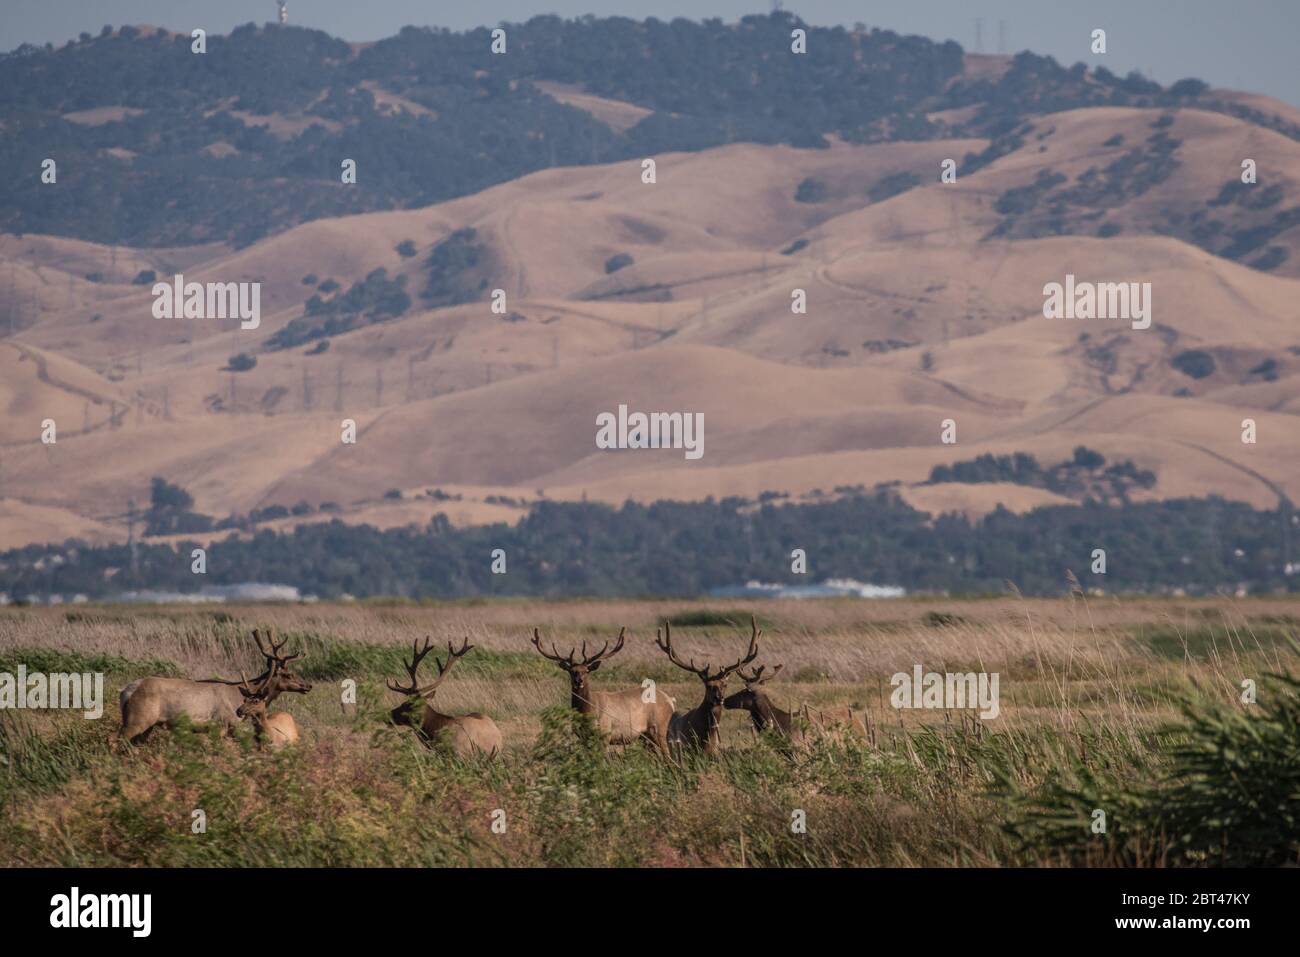 A herd of tule elk (Cervus canadensis nannodes) at grizzly island wildlife area, a part of the suisun marsh a large wetland in the Bay area of CA. Stock Photo